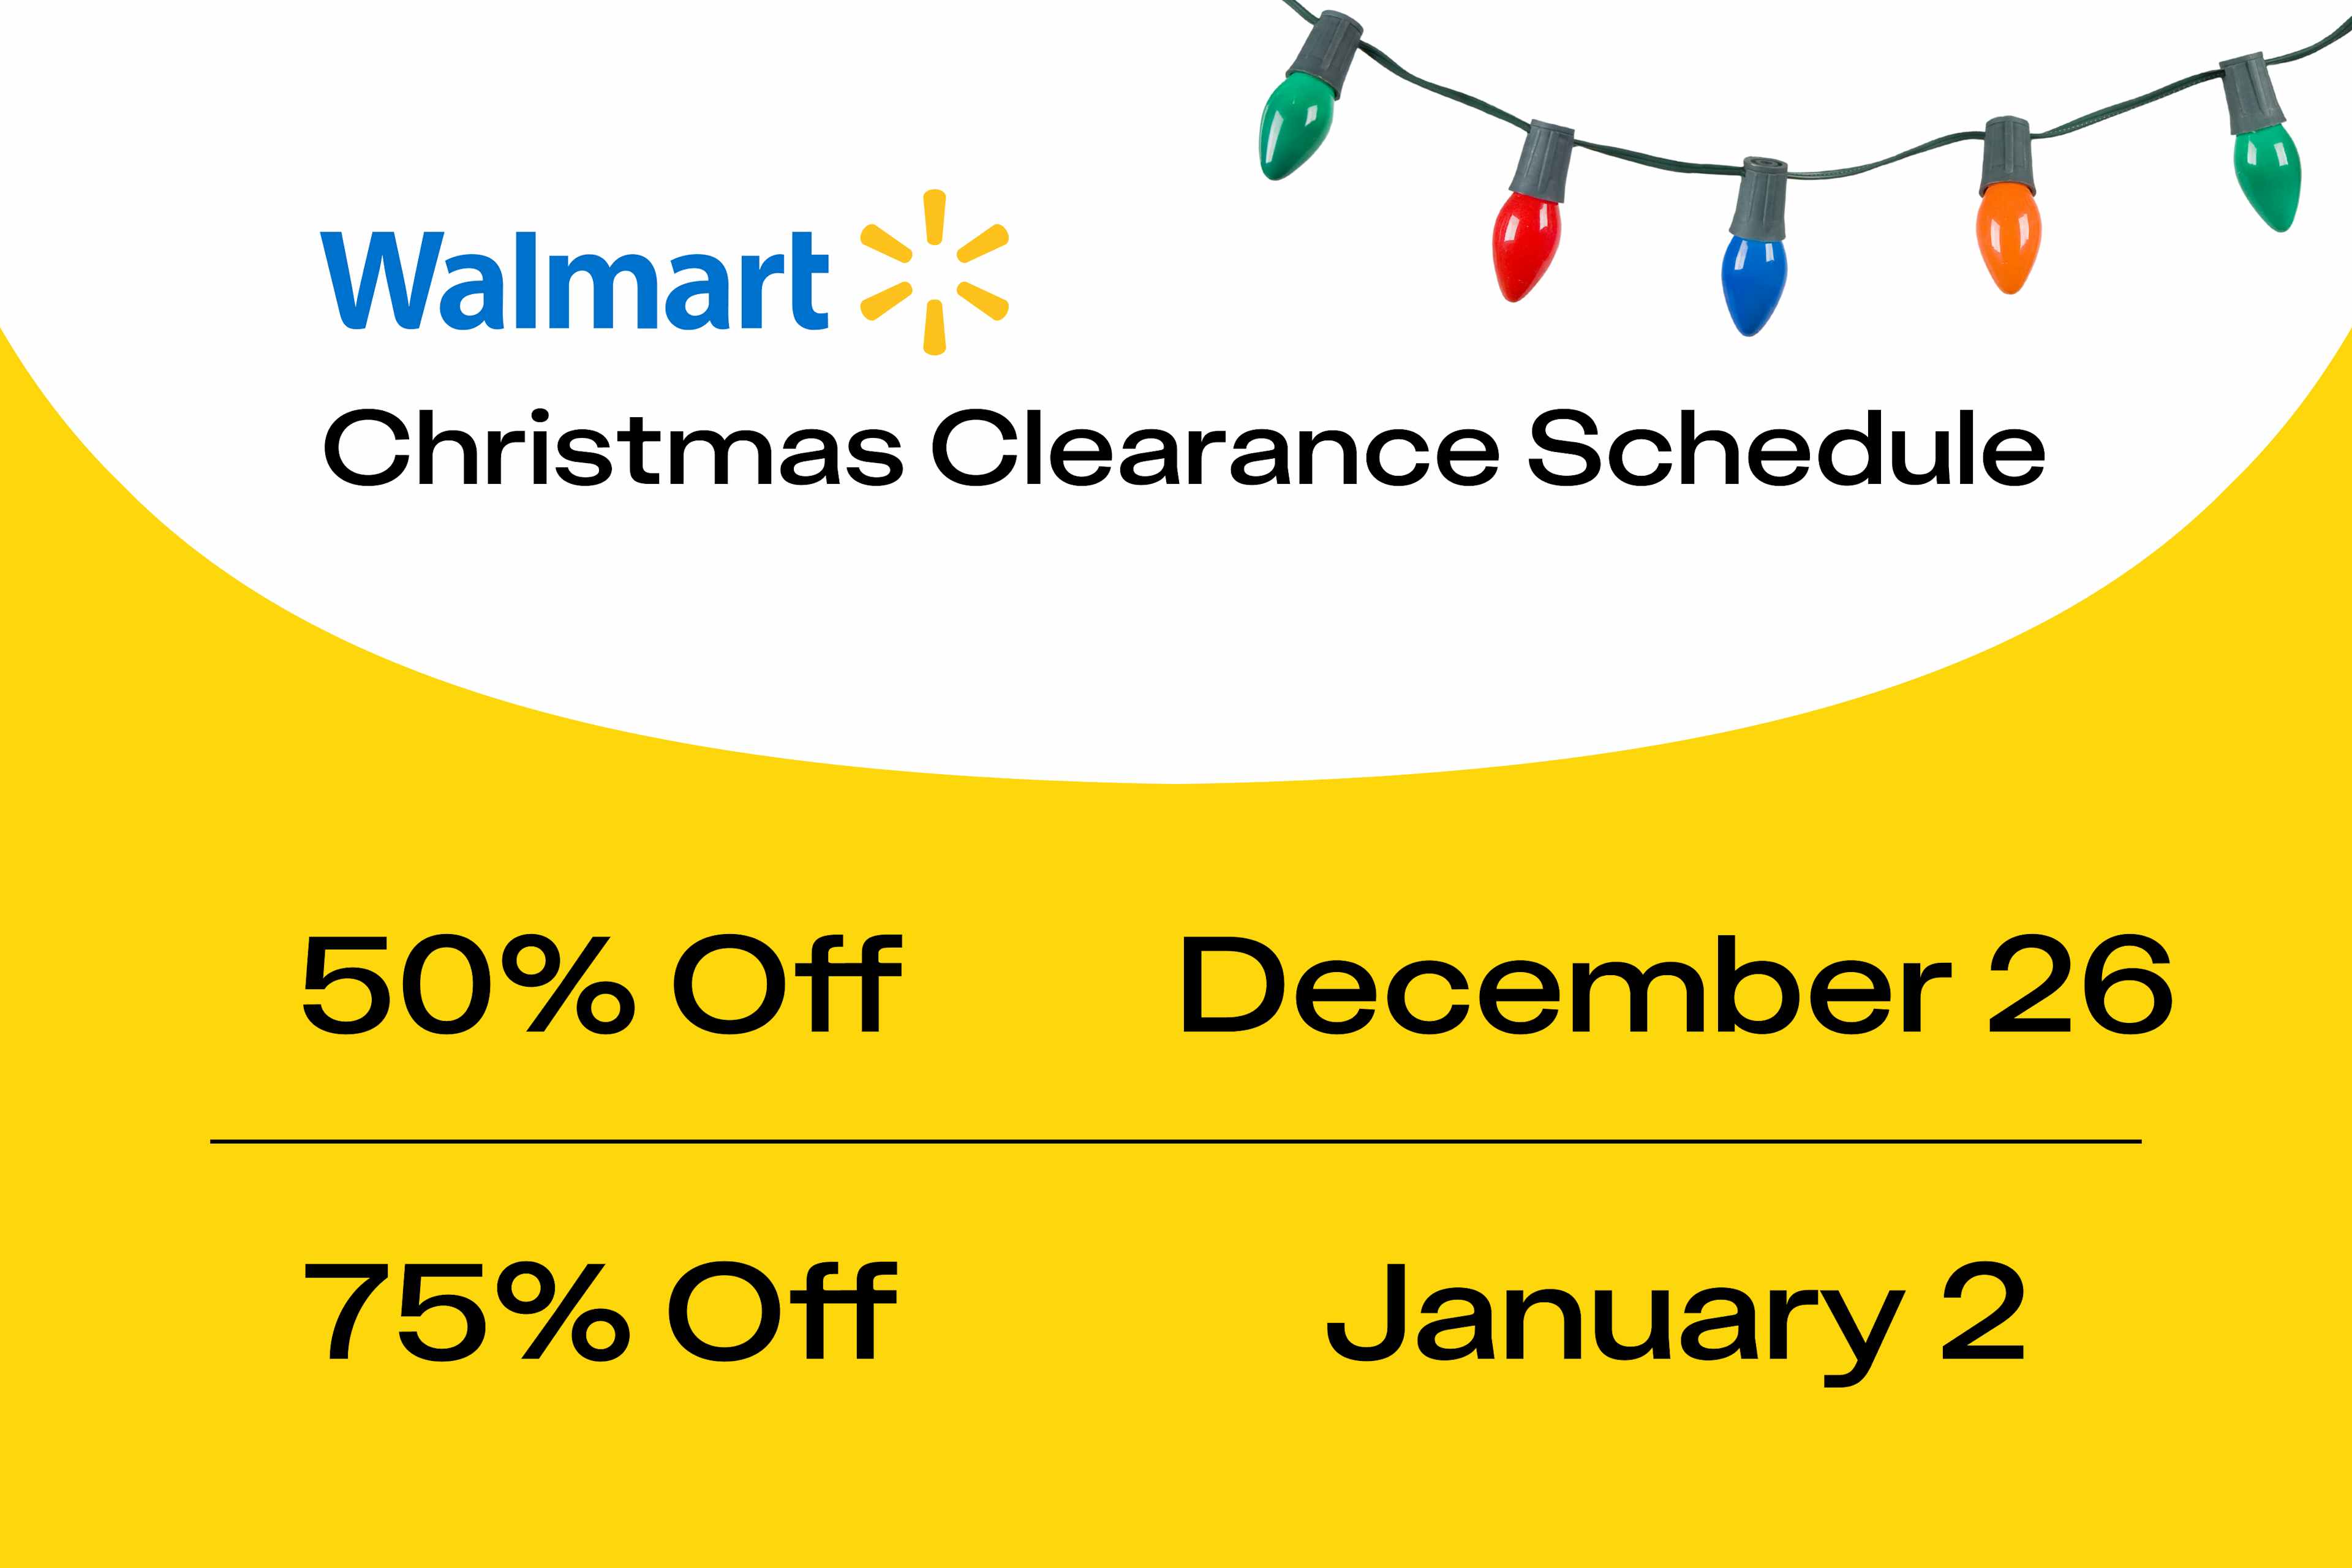 a graphic of the walmart christmas clearance schedule showing that clearance starts at 50% off on December 26 and jumps to 75% off on Jan...